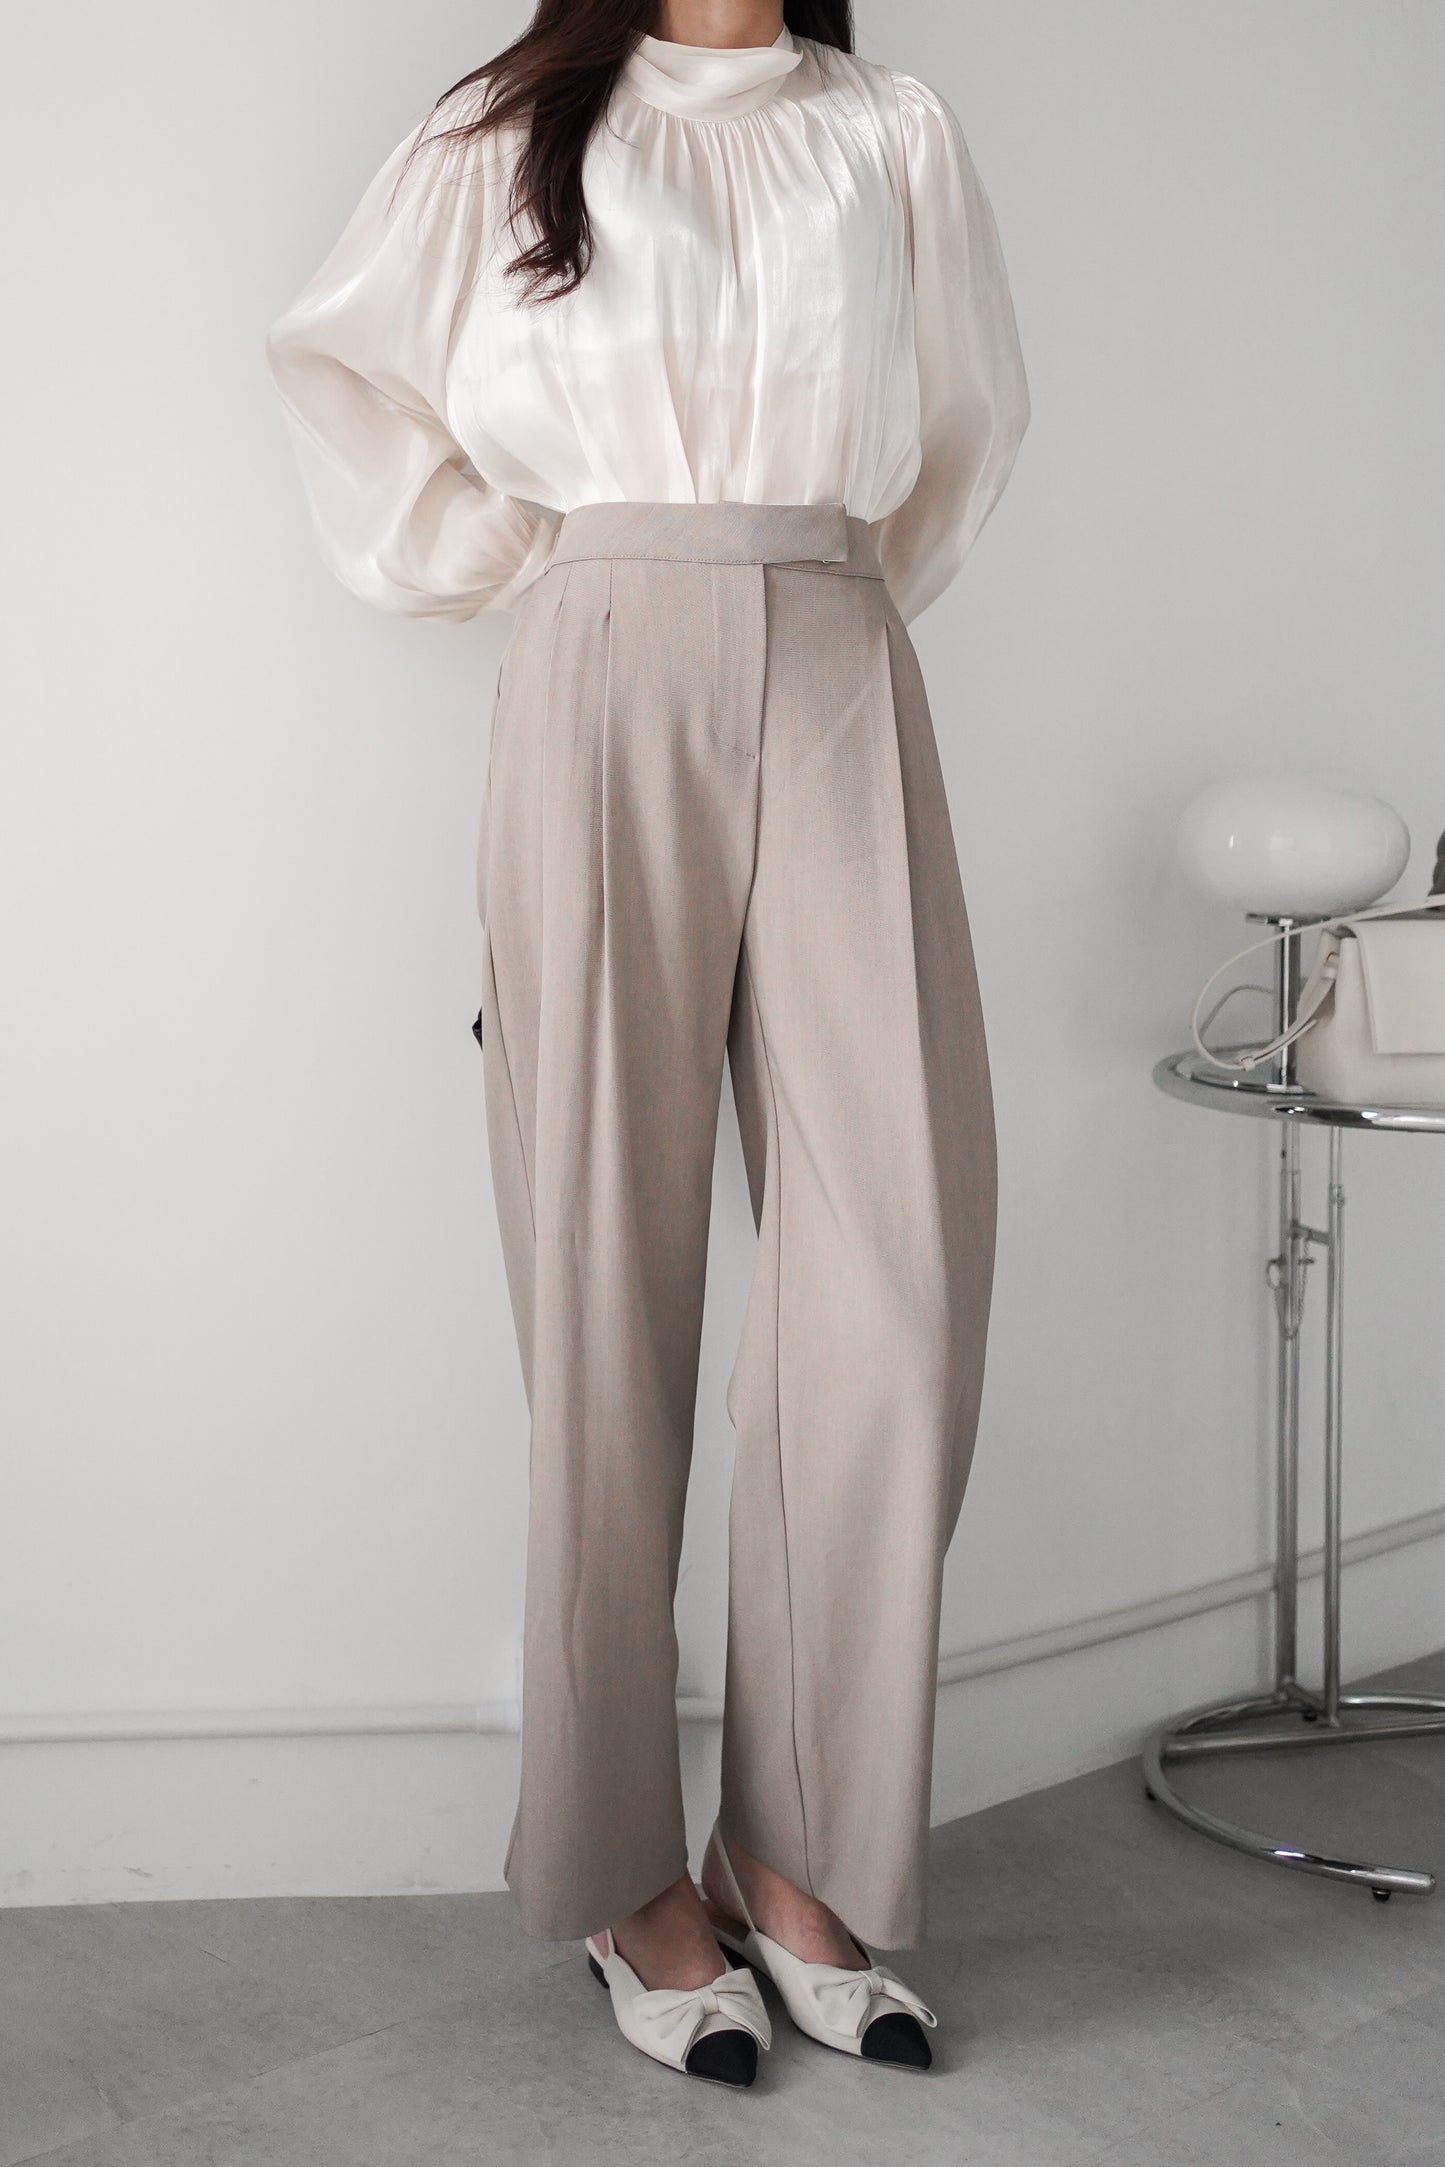 𝙆𝙚𝙙𝙞 𝘽𝙚𝙨𝙩✨ Tapered Suit Pants